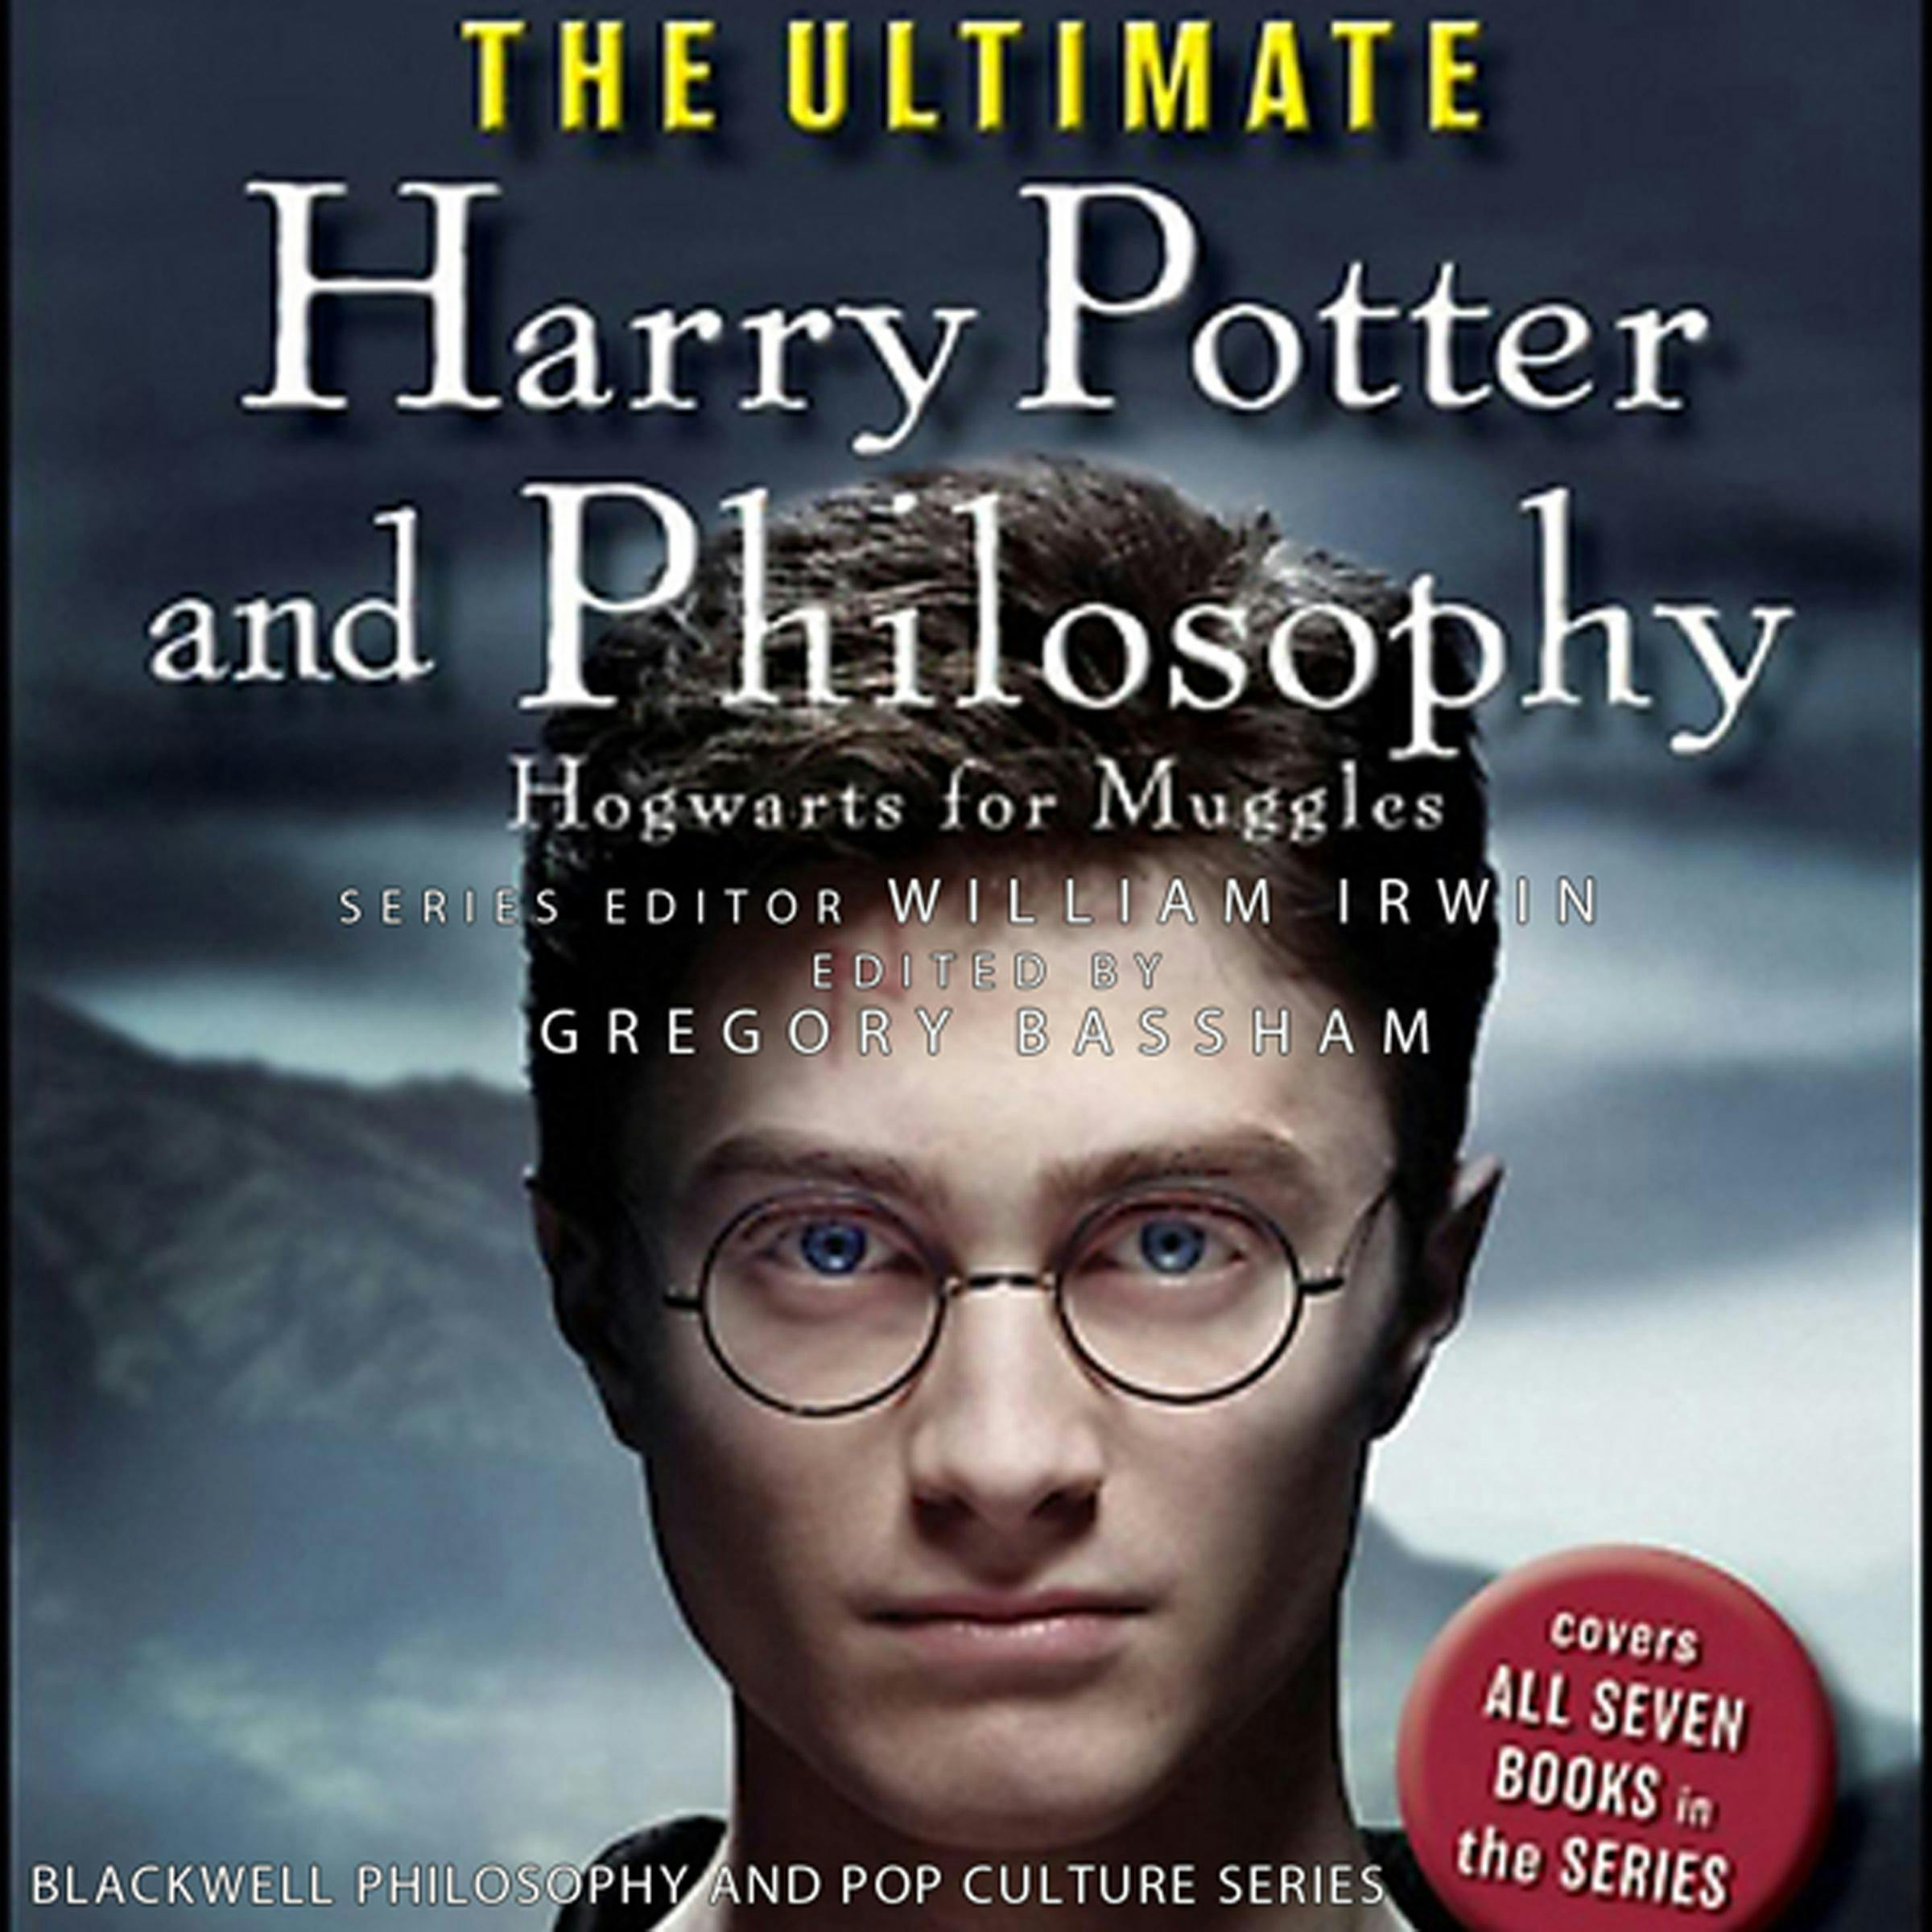 The Ultimate Harry Potter and Philosophy: Hogwarts for Muggles - William Irwin, Gregory Bassham